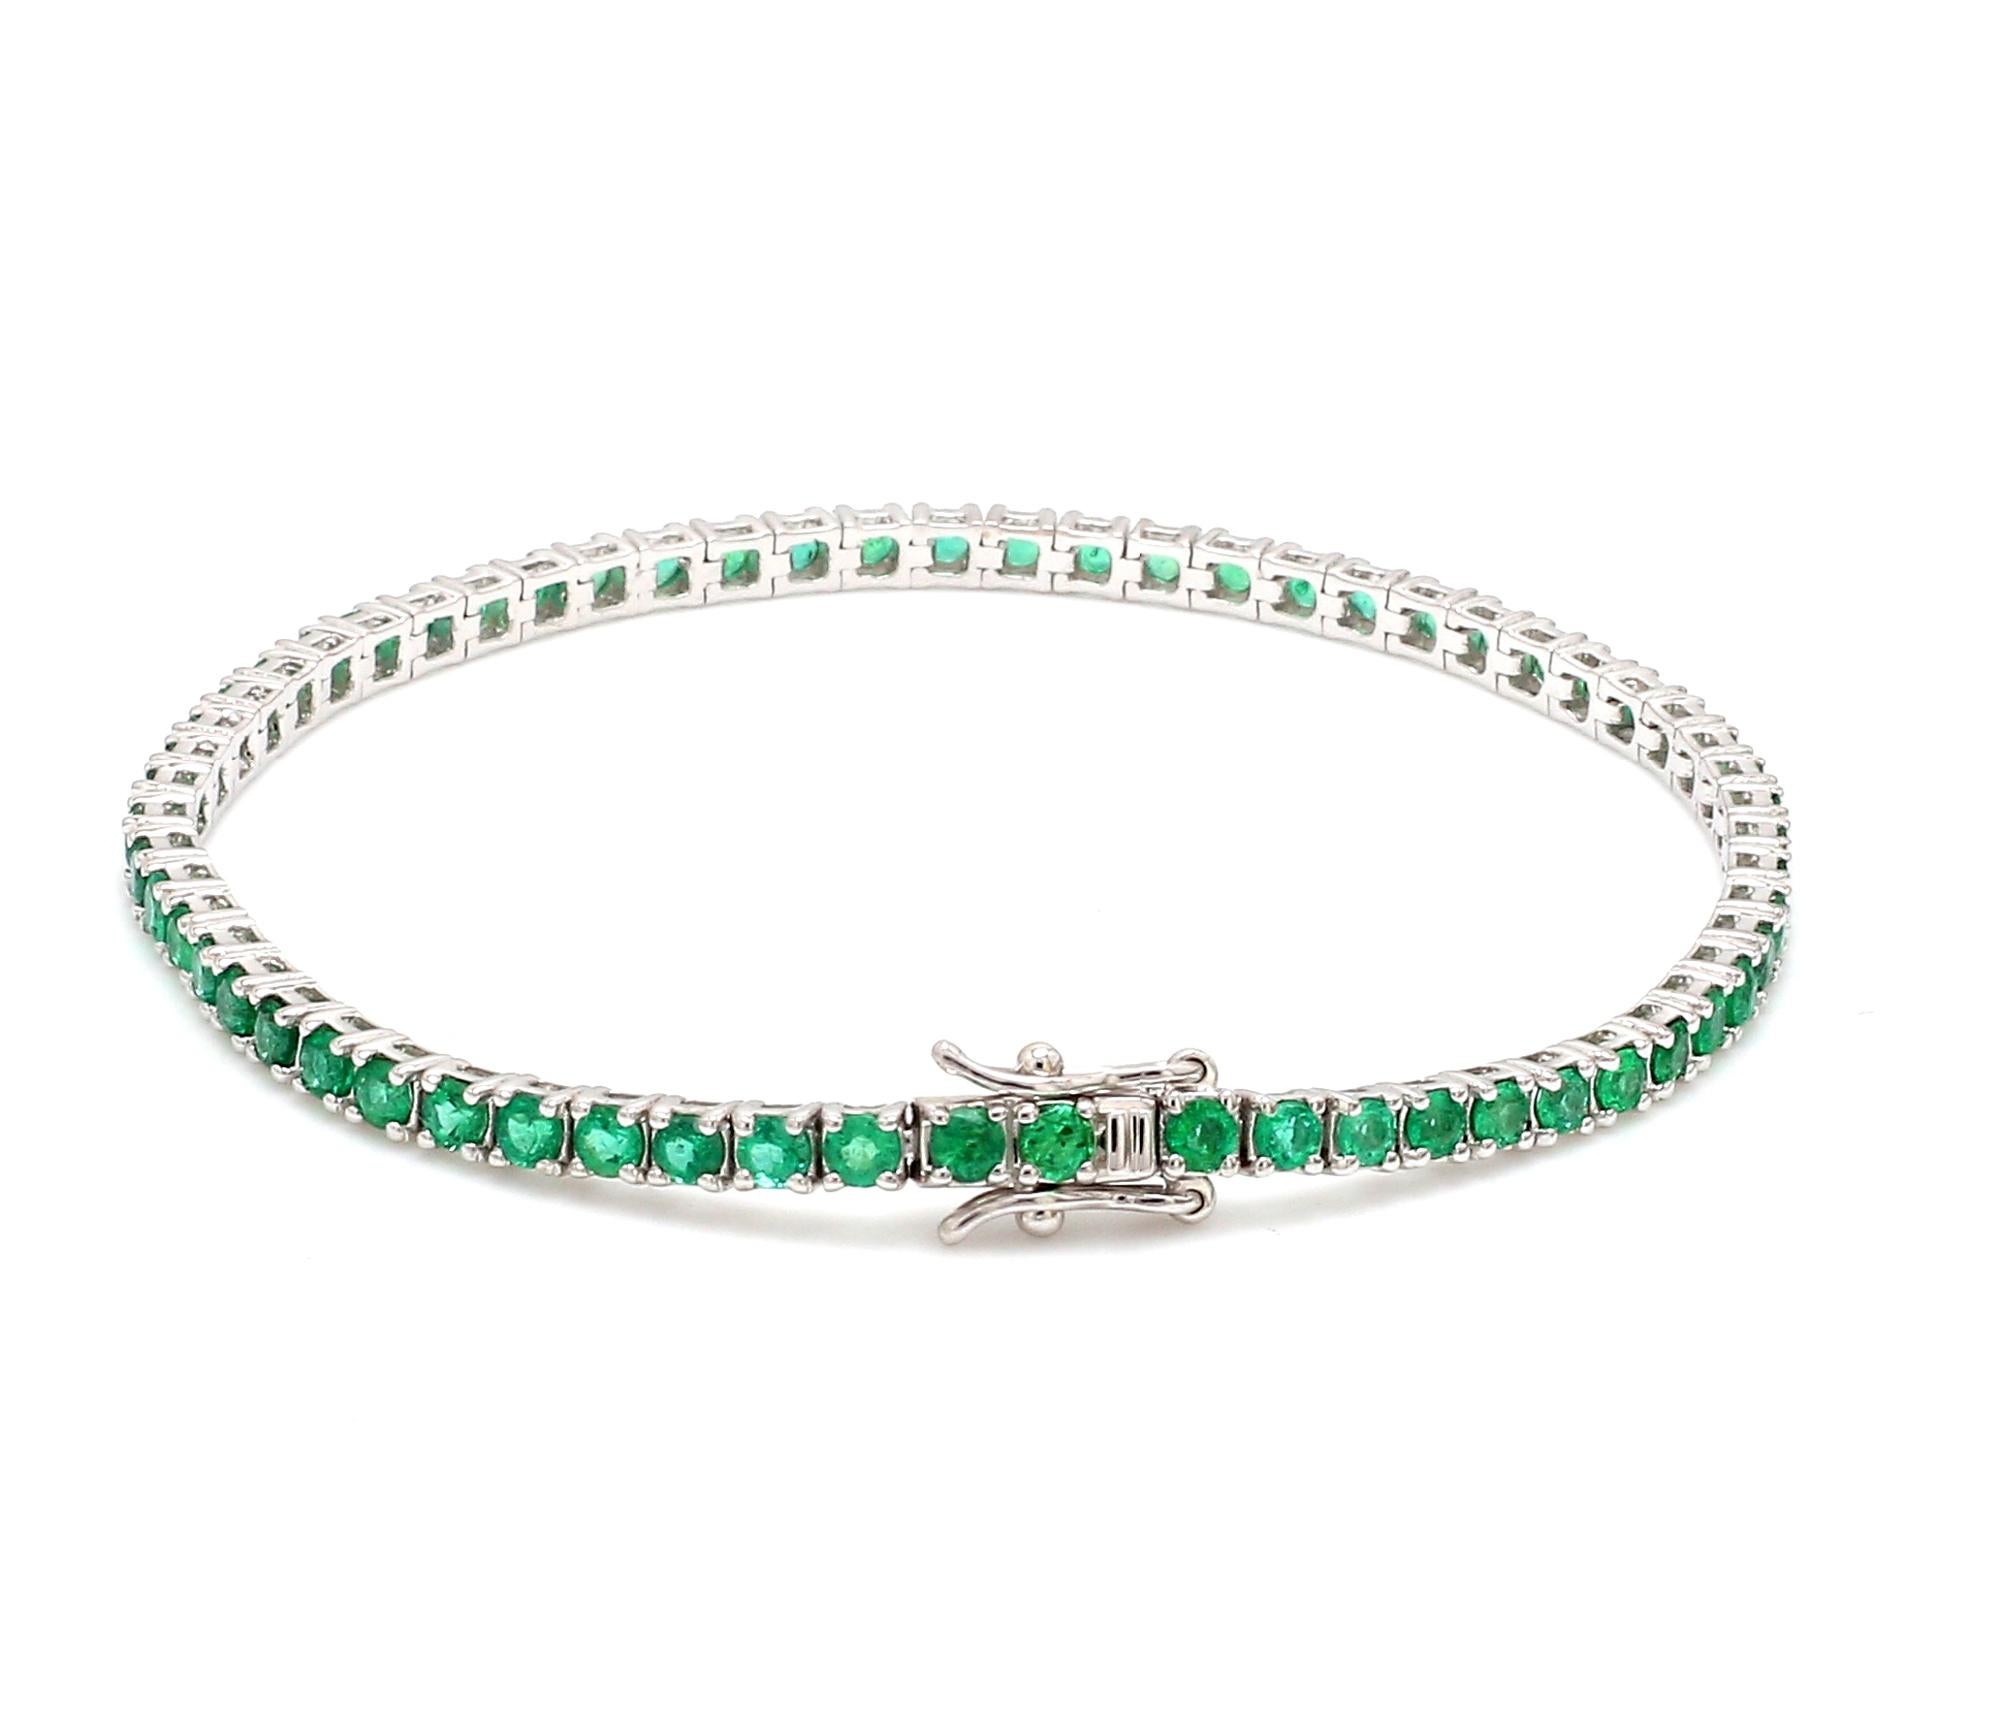 Item Code :- CN-24535 (14k)
Gross Weight :- 7.93 gm
14k White Gold Weight :- 7.32 gm
Emerald Weight :- 3.05 carat
Bracelet Length :- 7 Inches Long
✦ Sizing
.....................
We can adjust most items to fit your sizing preferences. Most items can